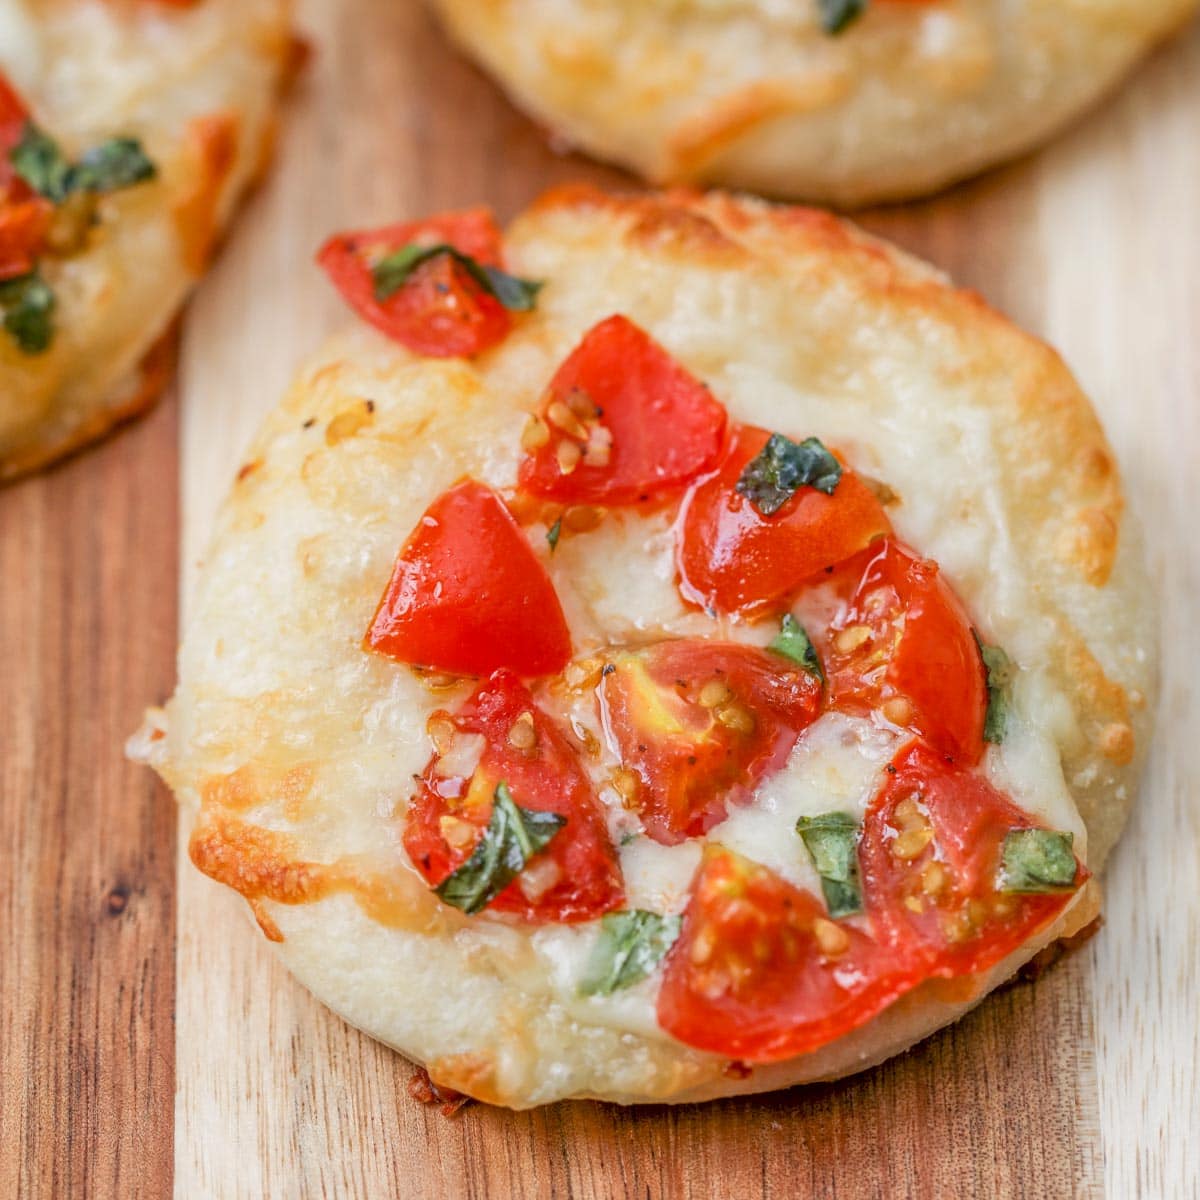 Finger food appetizers - mini pizzas topped with tomato and herbs.